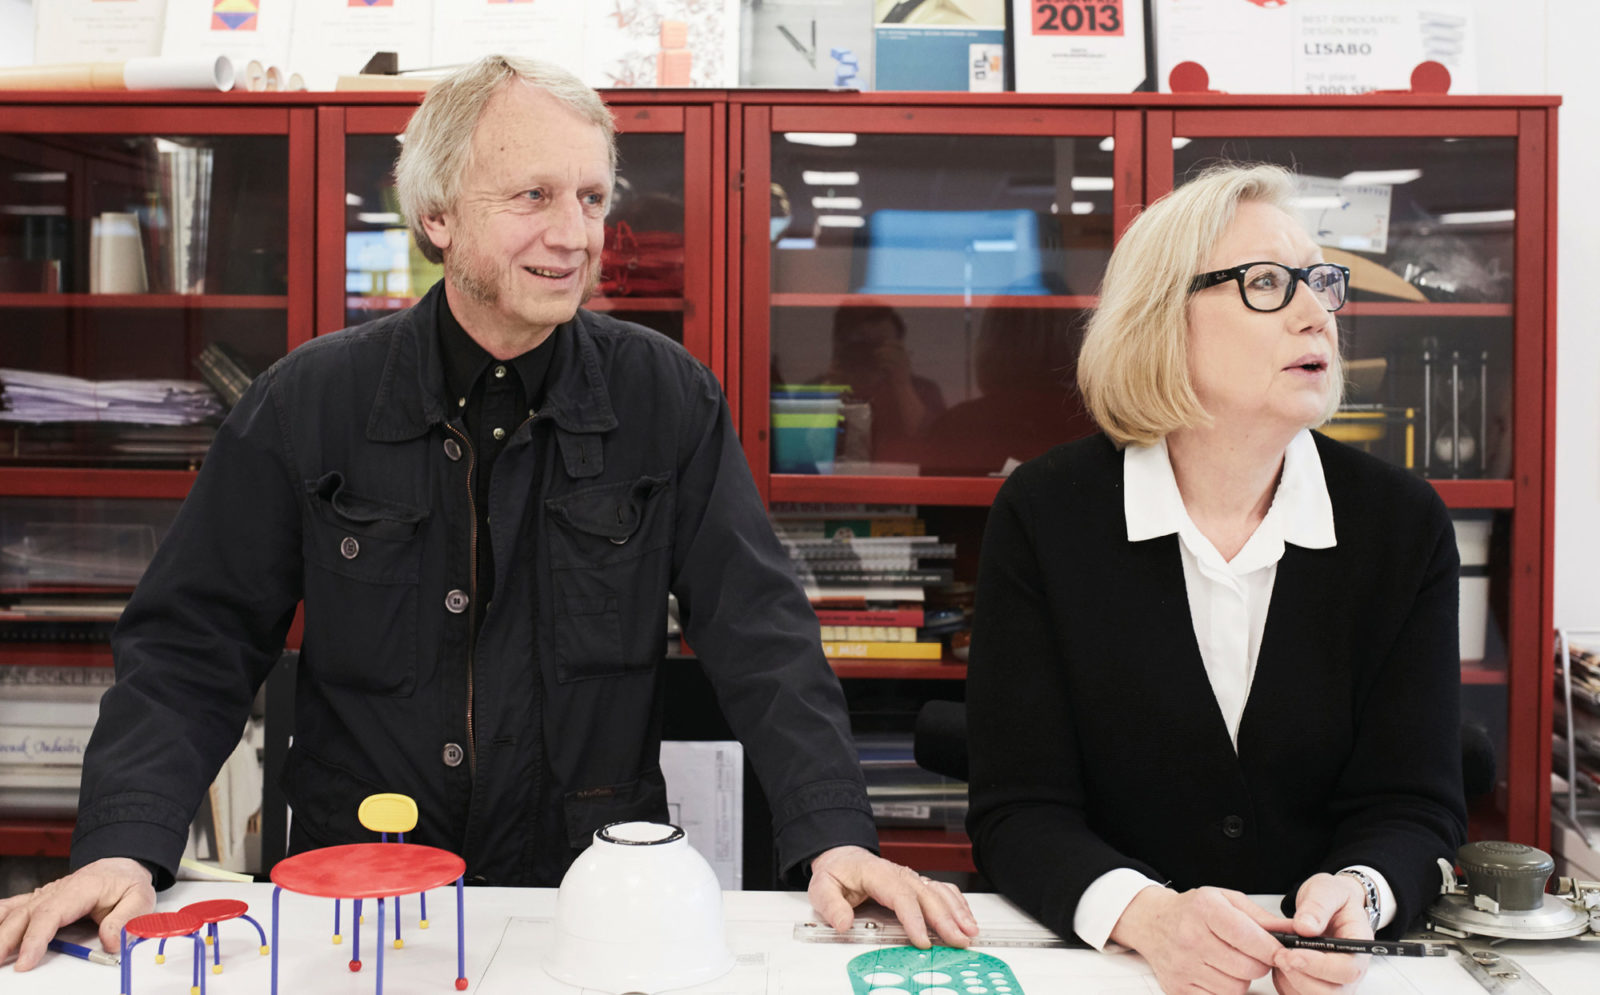 Middle-aged man and woman, blond, greying hair and black clothes, standing at a drawing table with prototypes and rulers.